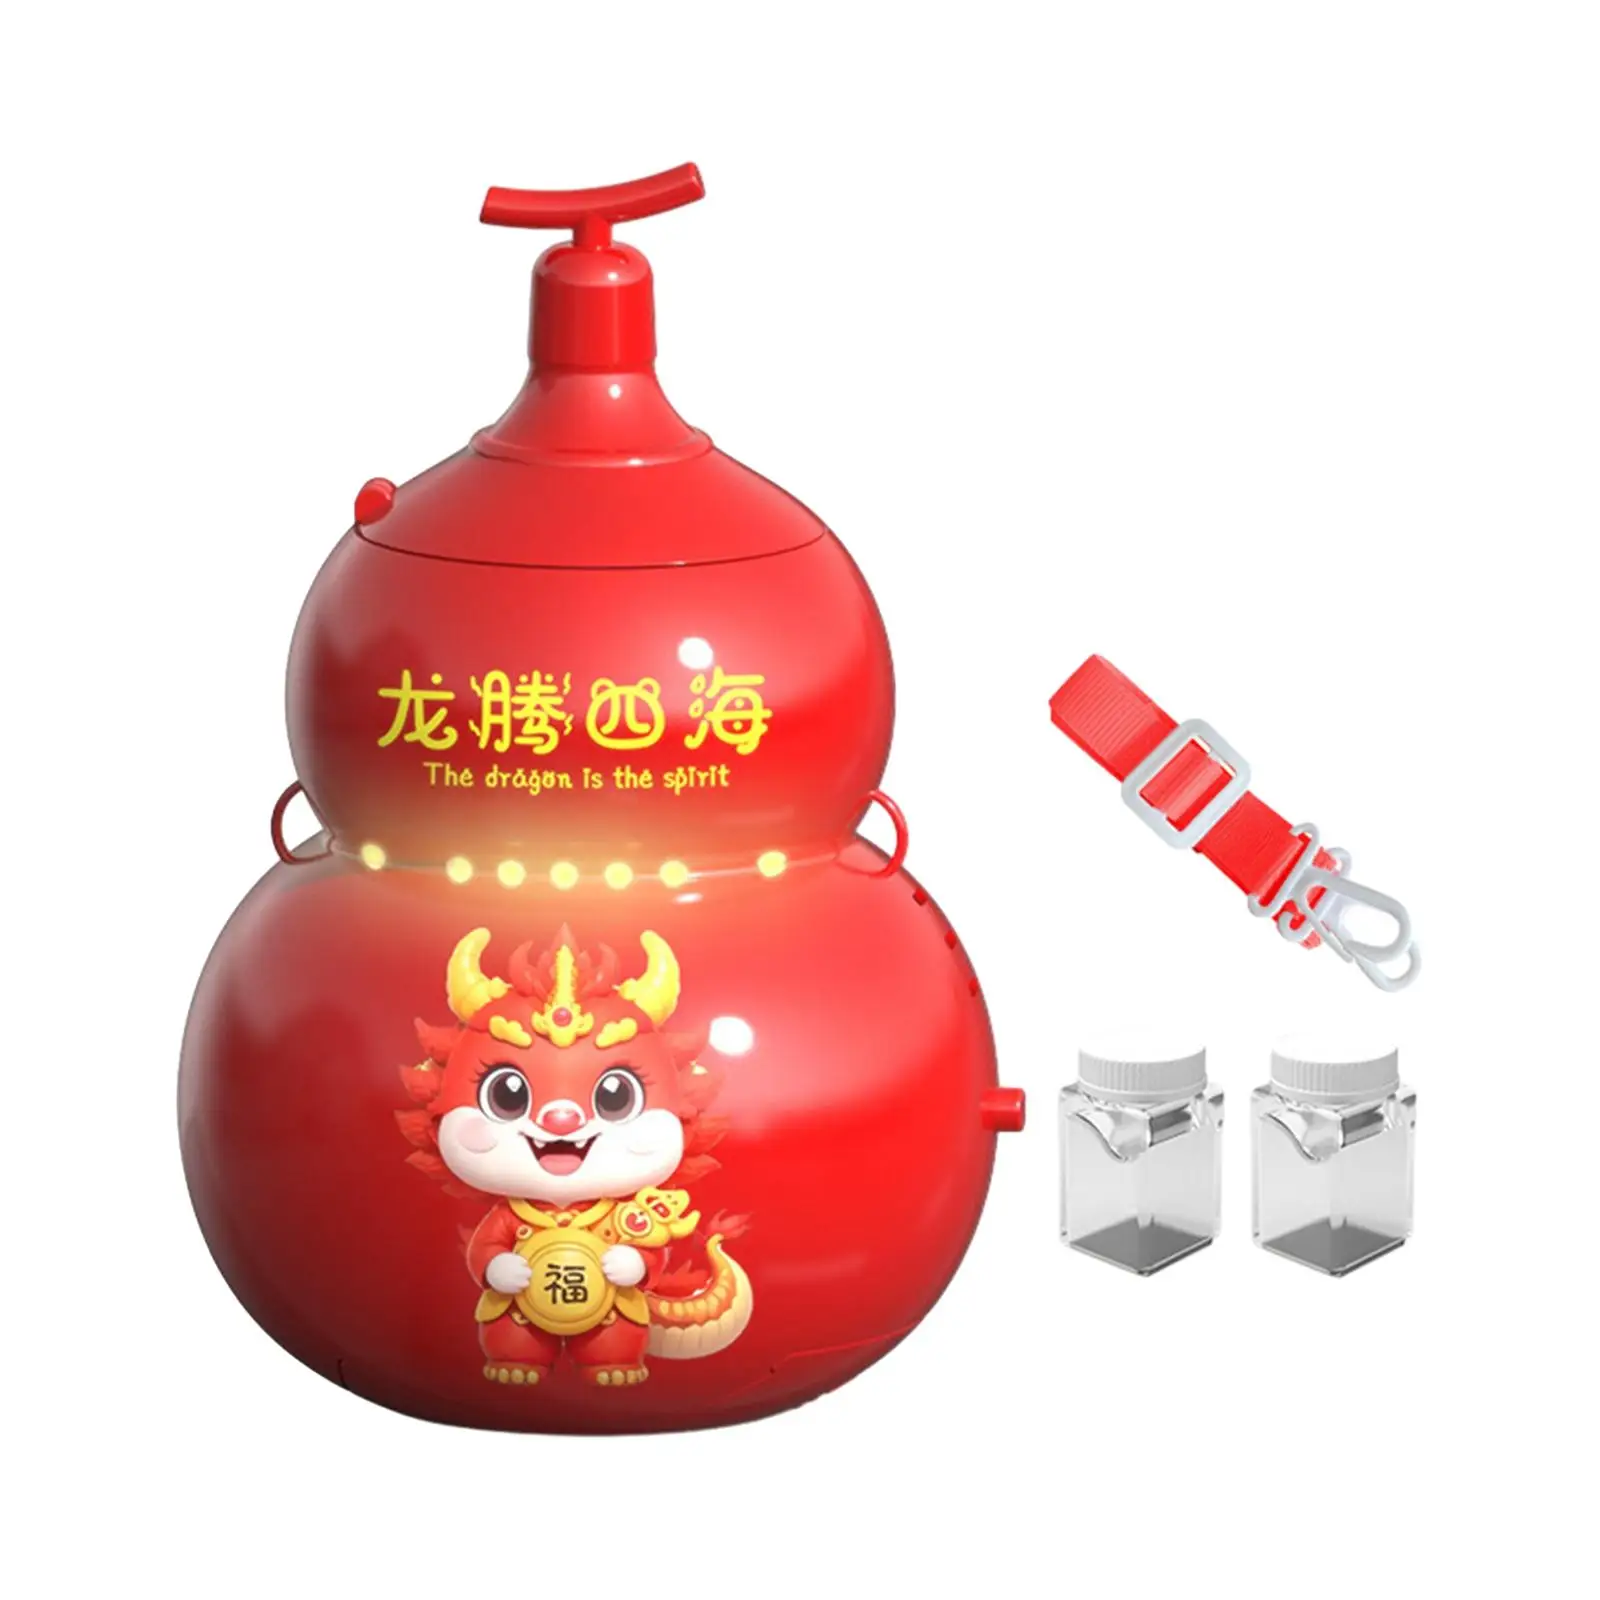 Chinese New Year with Sounds Beach Toy Portable Fireworks Bubble Machine for New Year Outdoor Activities Garden Indoor Celebrate